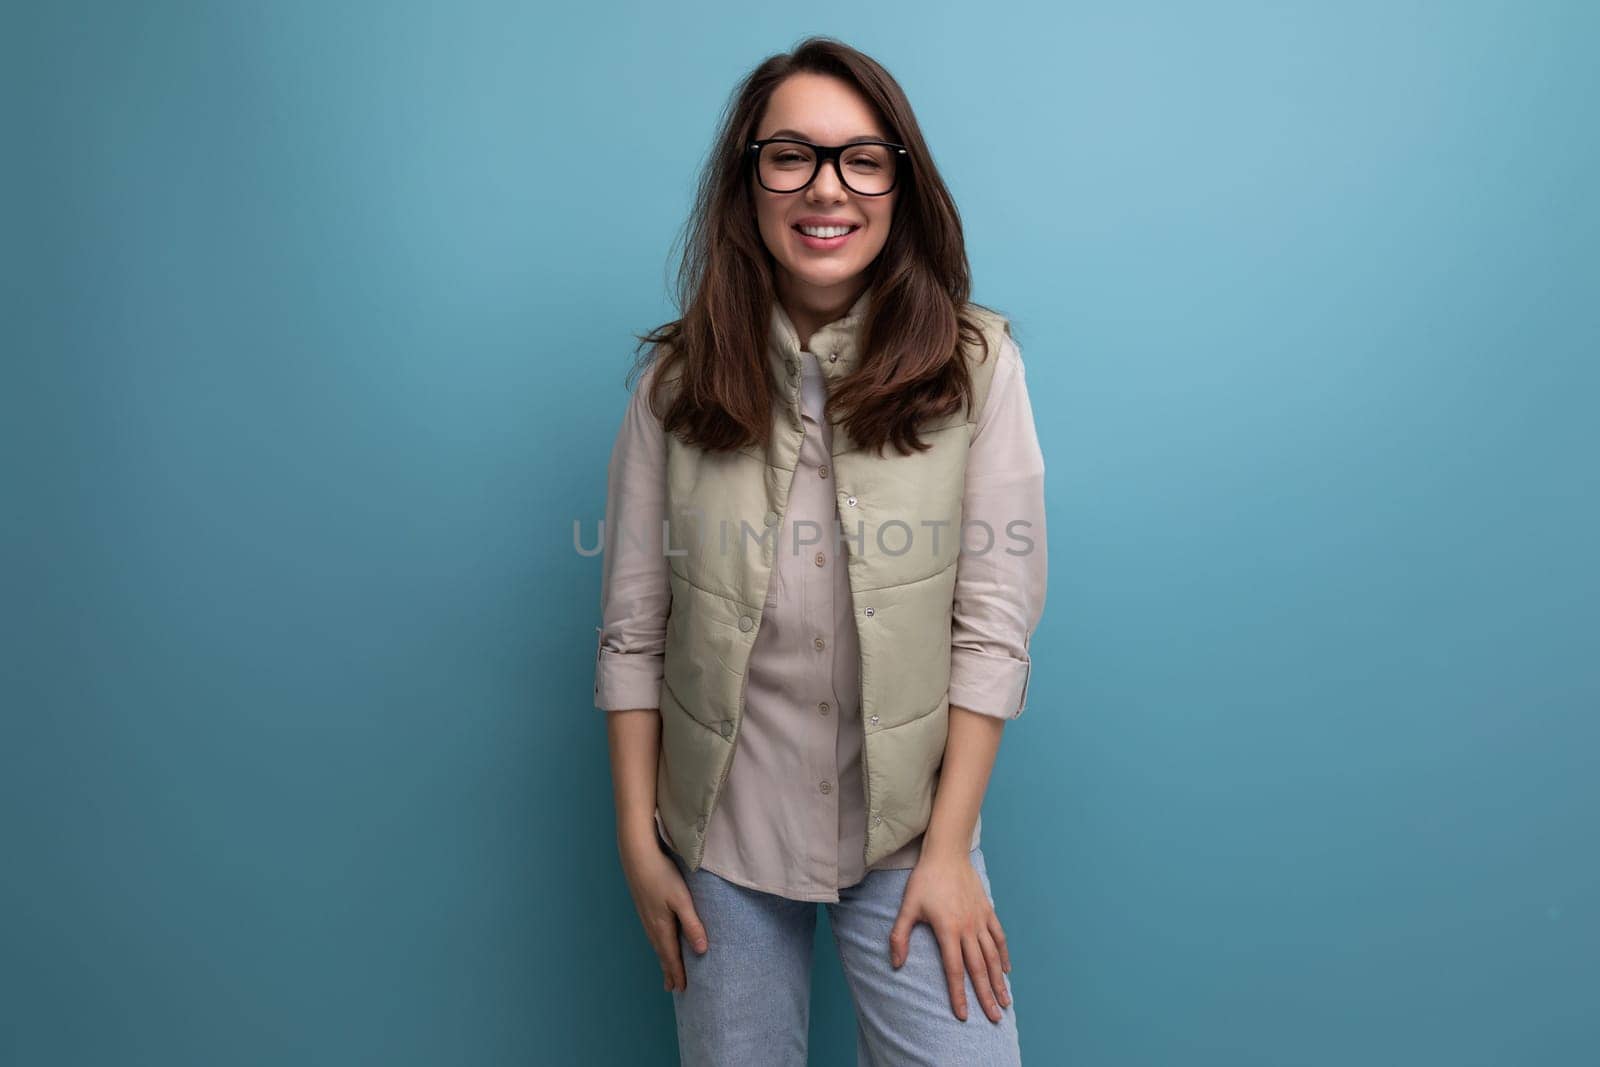 portrait of a well-groomed young brunette woman correcting her eyesight using glasses on a studio background with copy space.